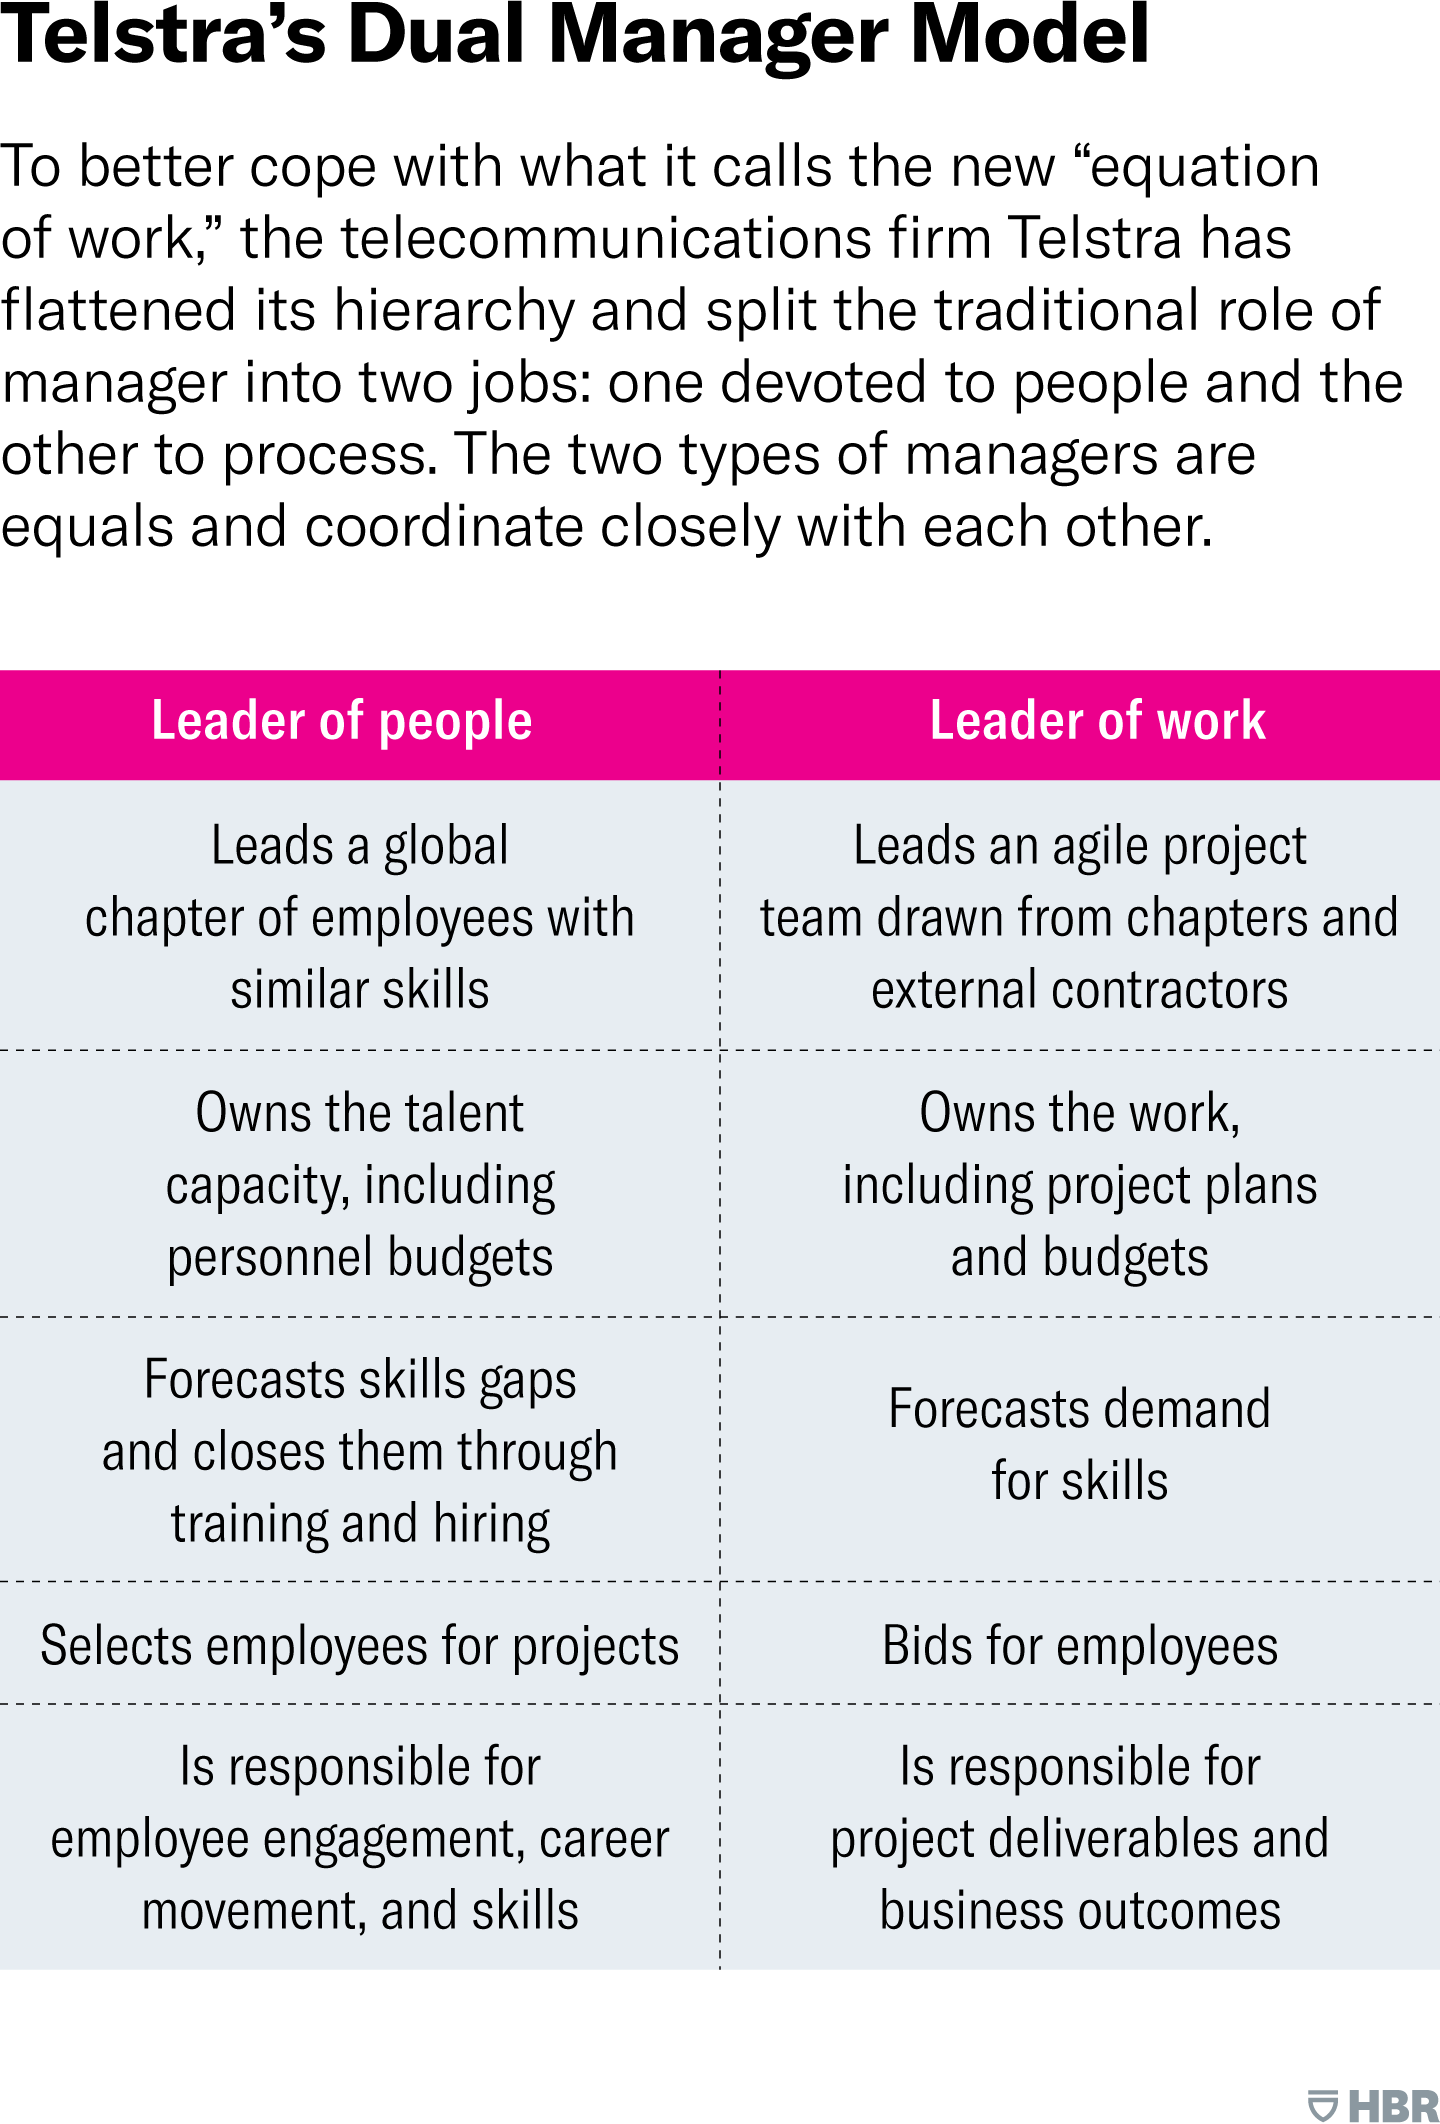 Telstra’s Dual Manager Model. To better cope with what it calls the new “equation of work,” Telstra has flattened its hierarchy and split the traditional role of manager into two jobs: one devoted to people and the other to process. The two types of managers, which the company calls “leaders of people” and “leaders of work” respectively, are equals and coordinate closely with each other. Responsibilities of a Leader of People include: Leading a global chapter of employees with similar skills; Owning the talent capacity, including personnel budgets; Forecasting skills gaps and closing them through training and hiring; Selecting employees for projects; and Being accountable for employee engagement, career movement, and skills. Responsibilities of a Leader of Work include: Leading an agile project team drawn from chapters and external con-tractors; Owning the work, including project plans and budgets; Forecasting demand for skills; Bidding for employees; and being accountable for project deliverables and business outcomes.